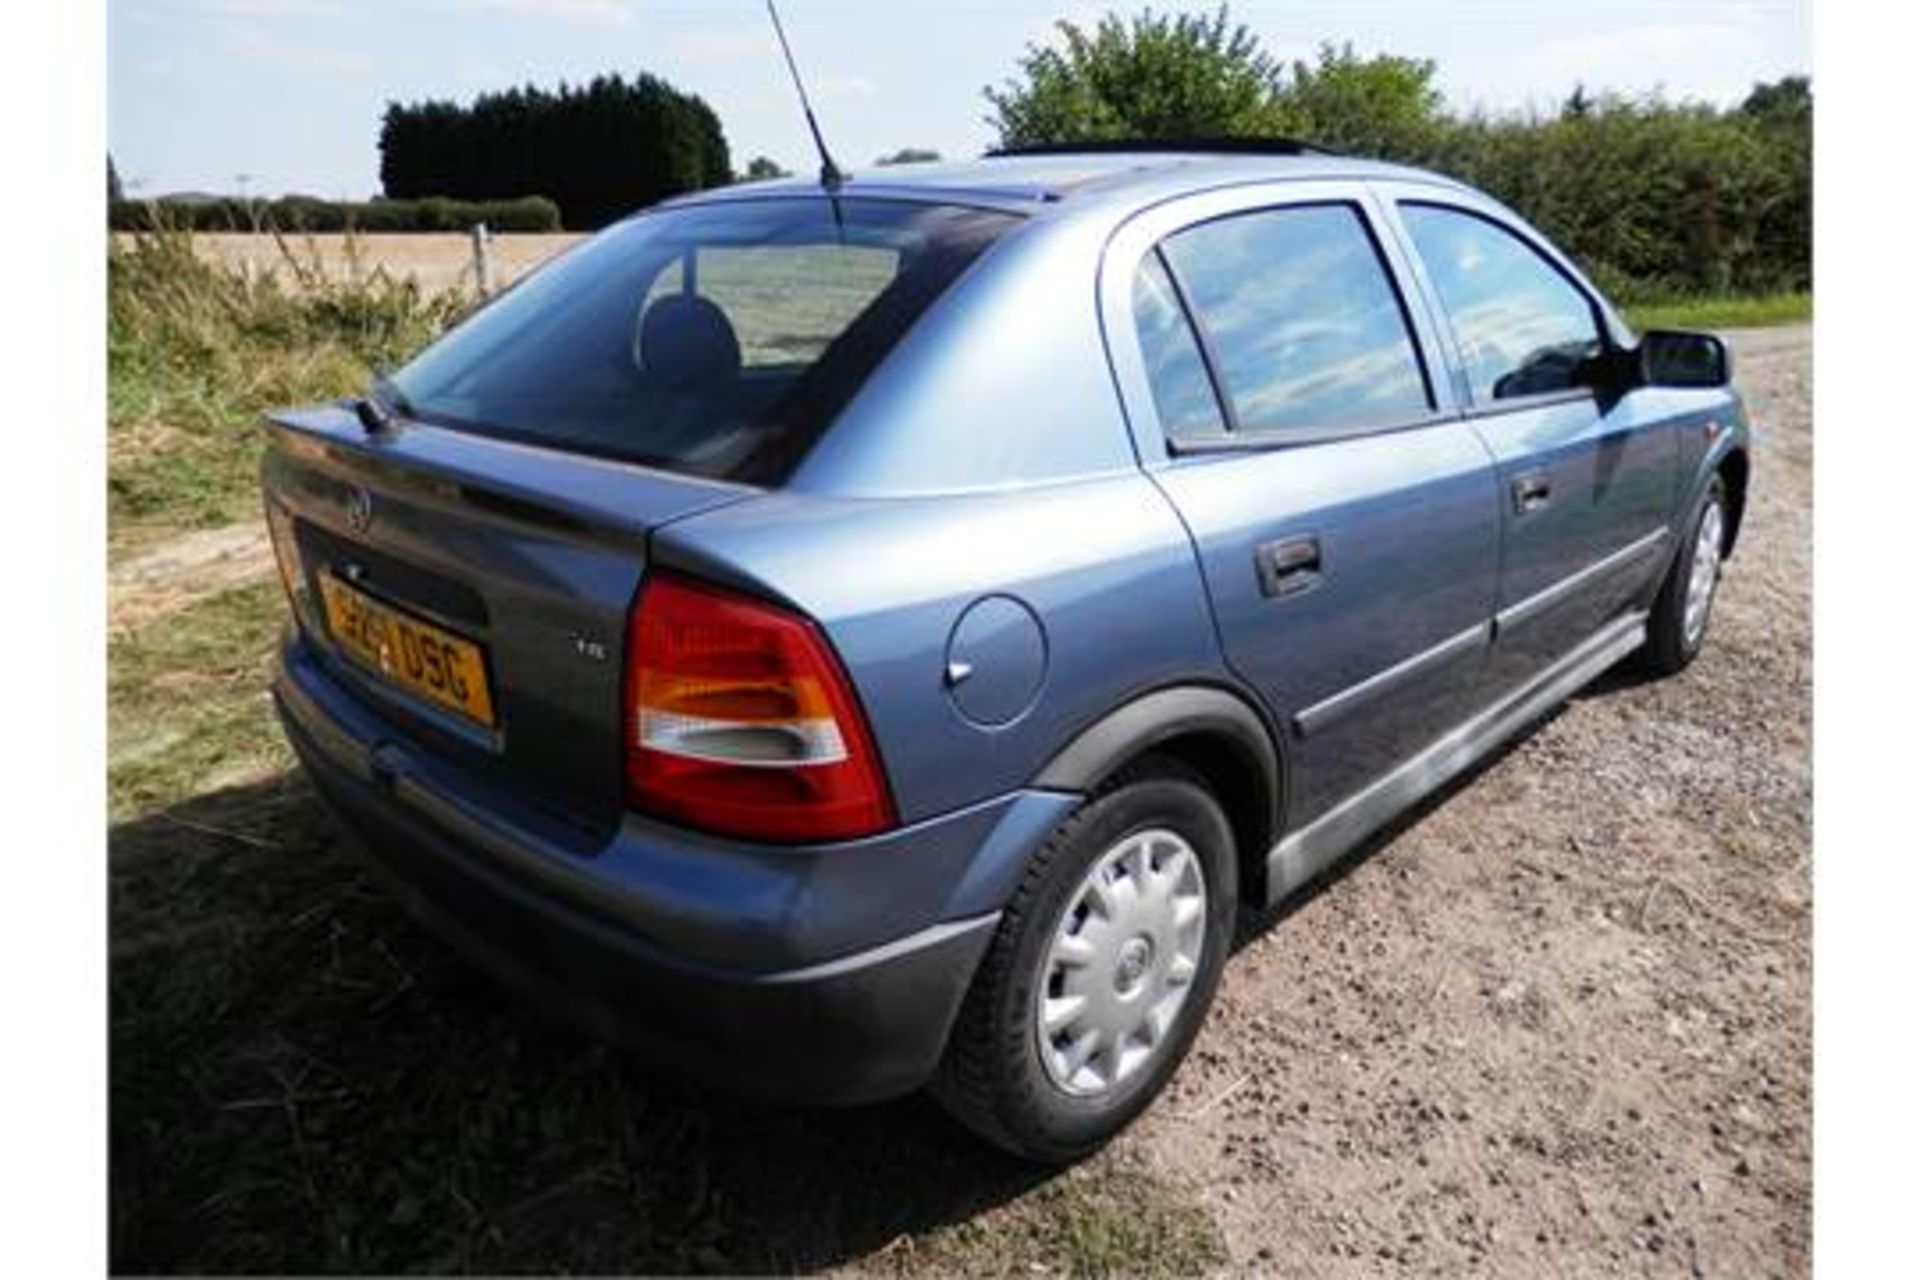 1998/S REG VAUXHALL ASTRA 1.6 LS 16 VALVE IN BLUE. 79K MILES VERIFIED. MOT 04 MARCH 2017. HPI CLEAR - Image 4 of 21